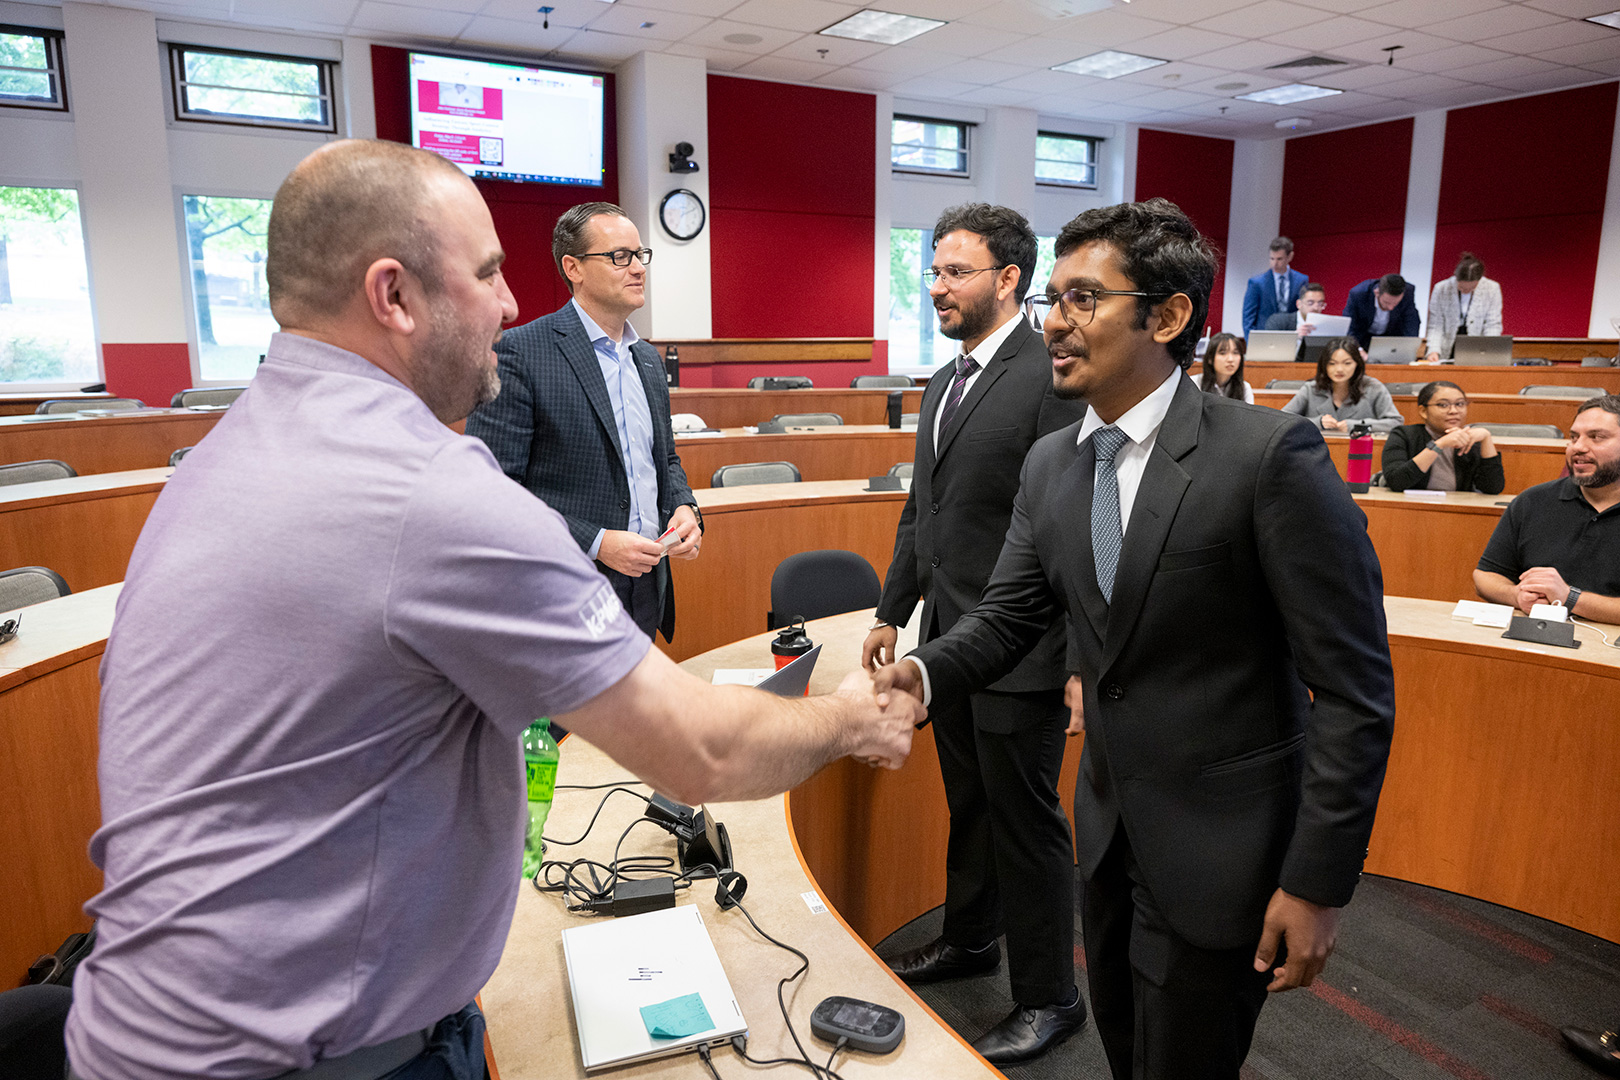 Student participants had the opportunity to network with Deloitte and KPMG judges during the Datathon finale. 